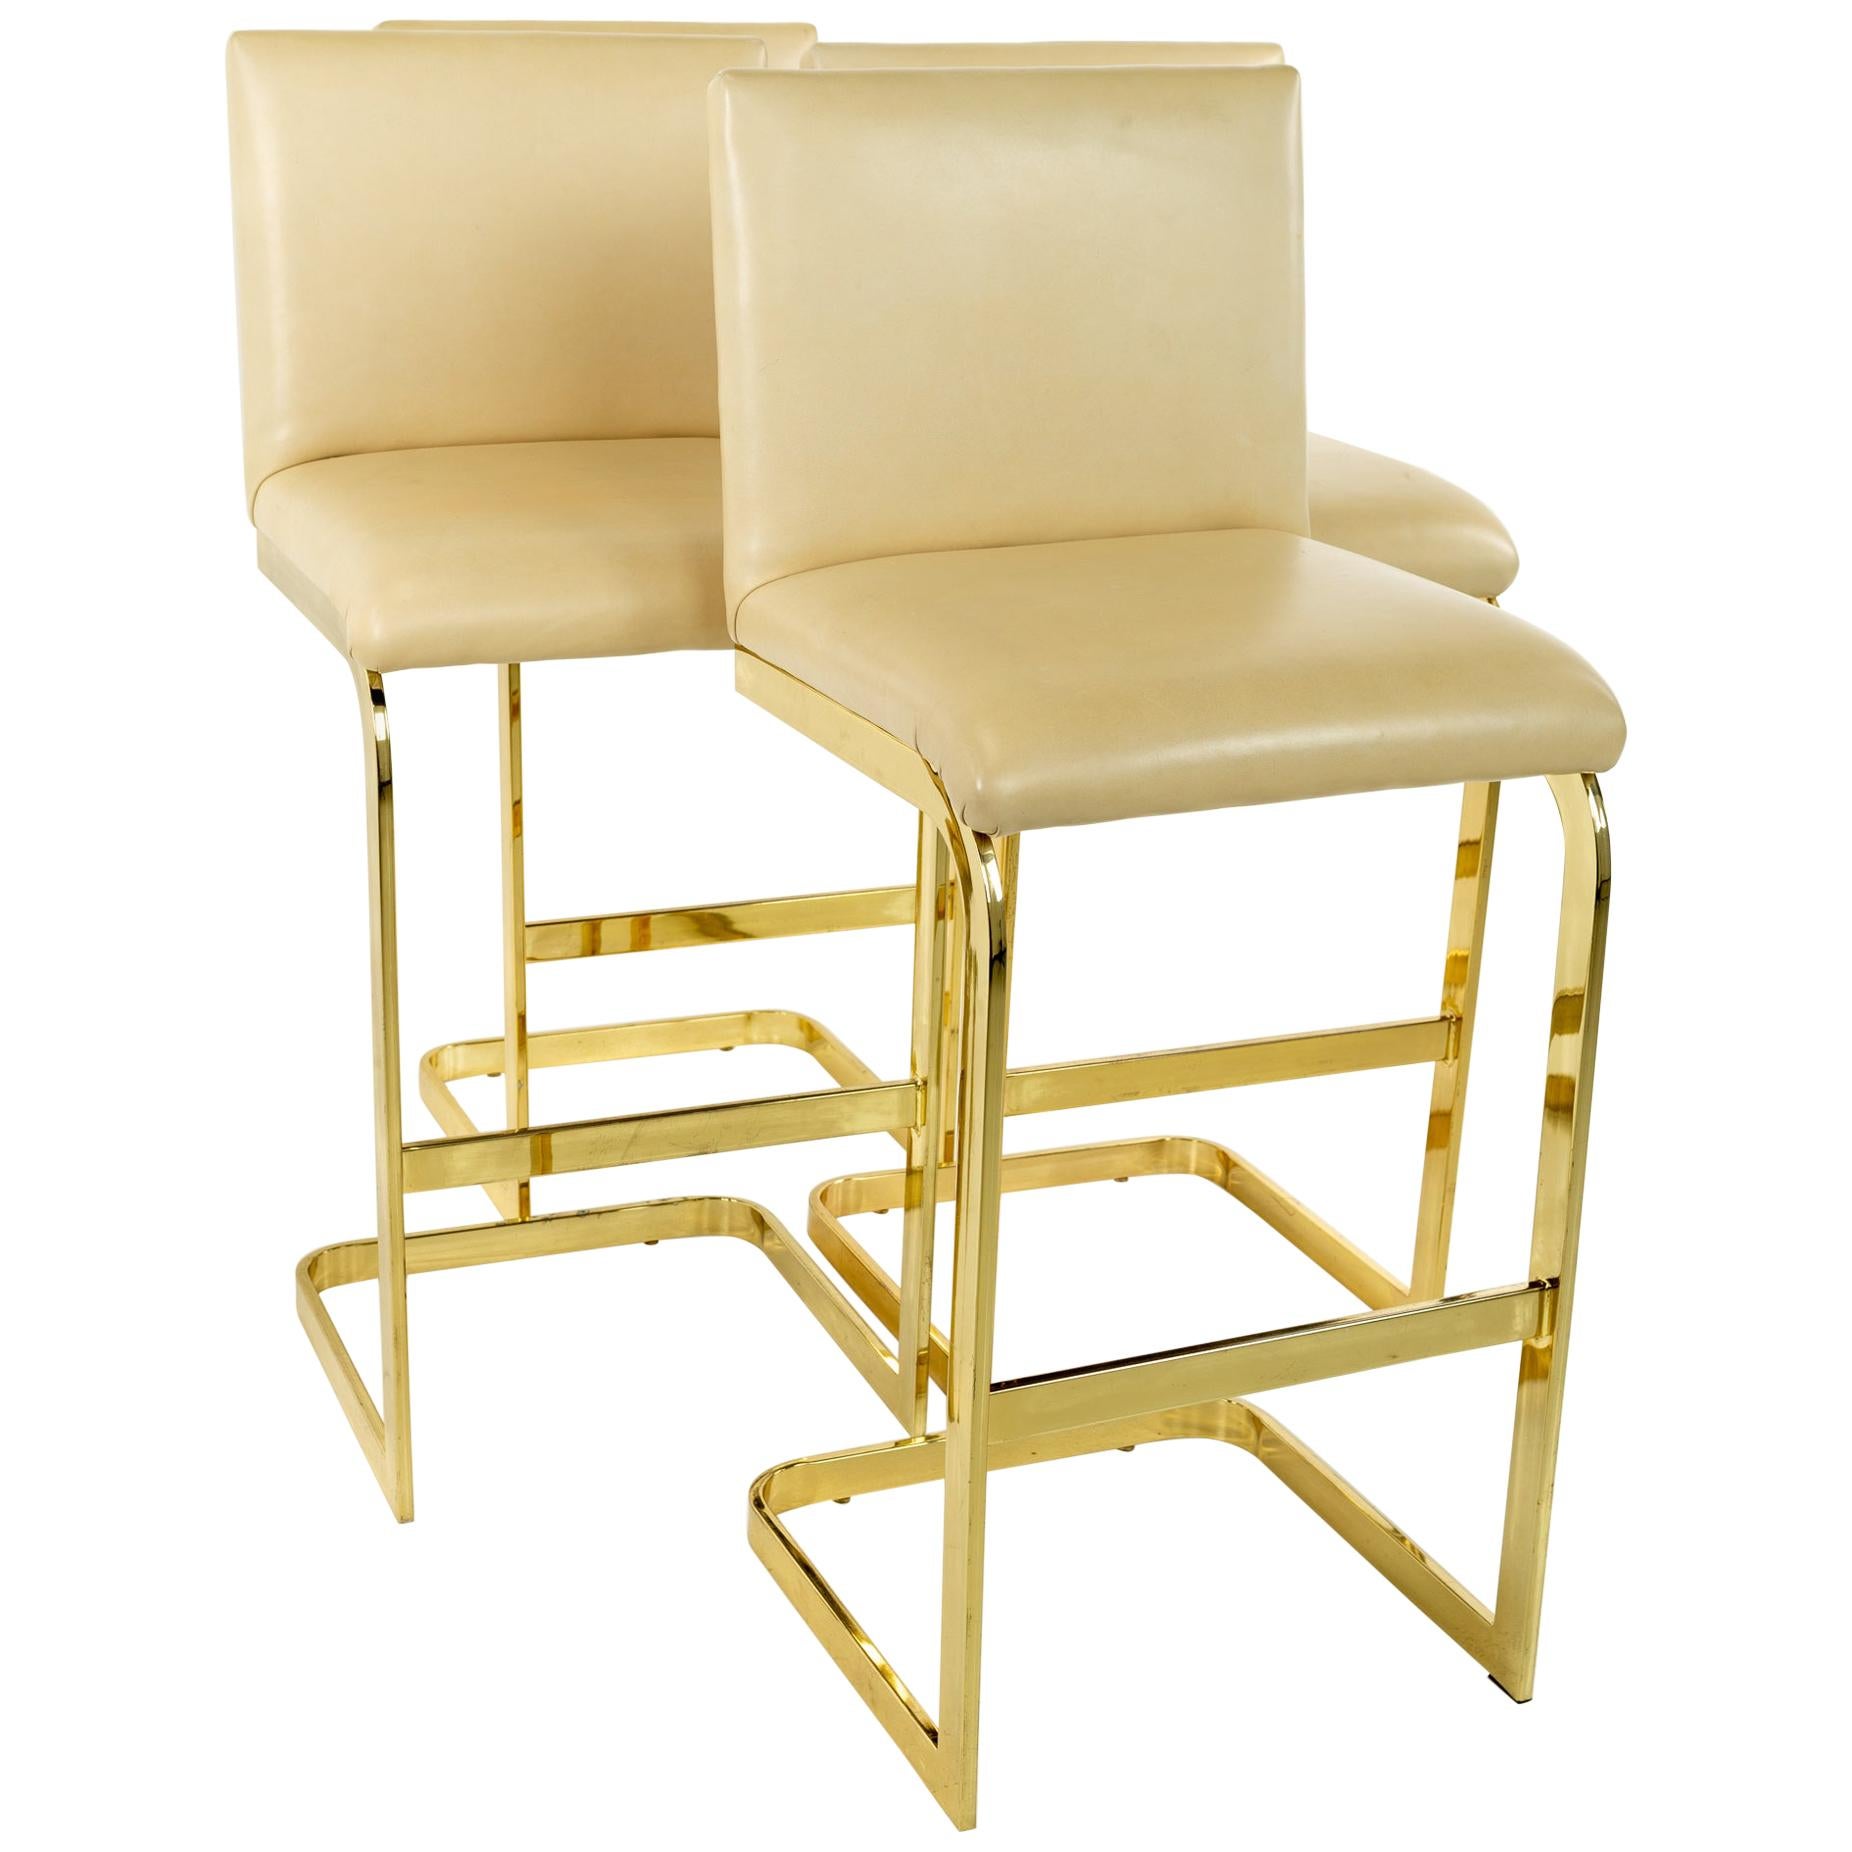 Milo Baughman Style Mid Century Brass and Cream Upholstered Cantilever Bar Stool